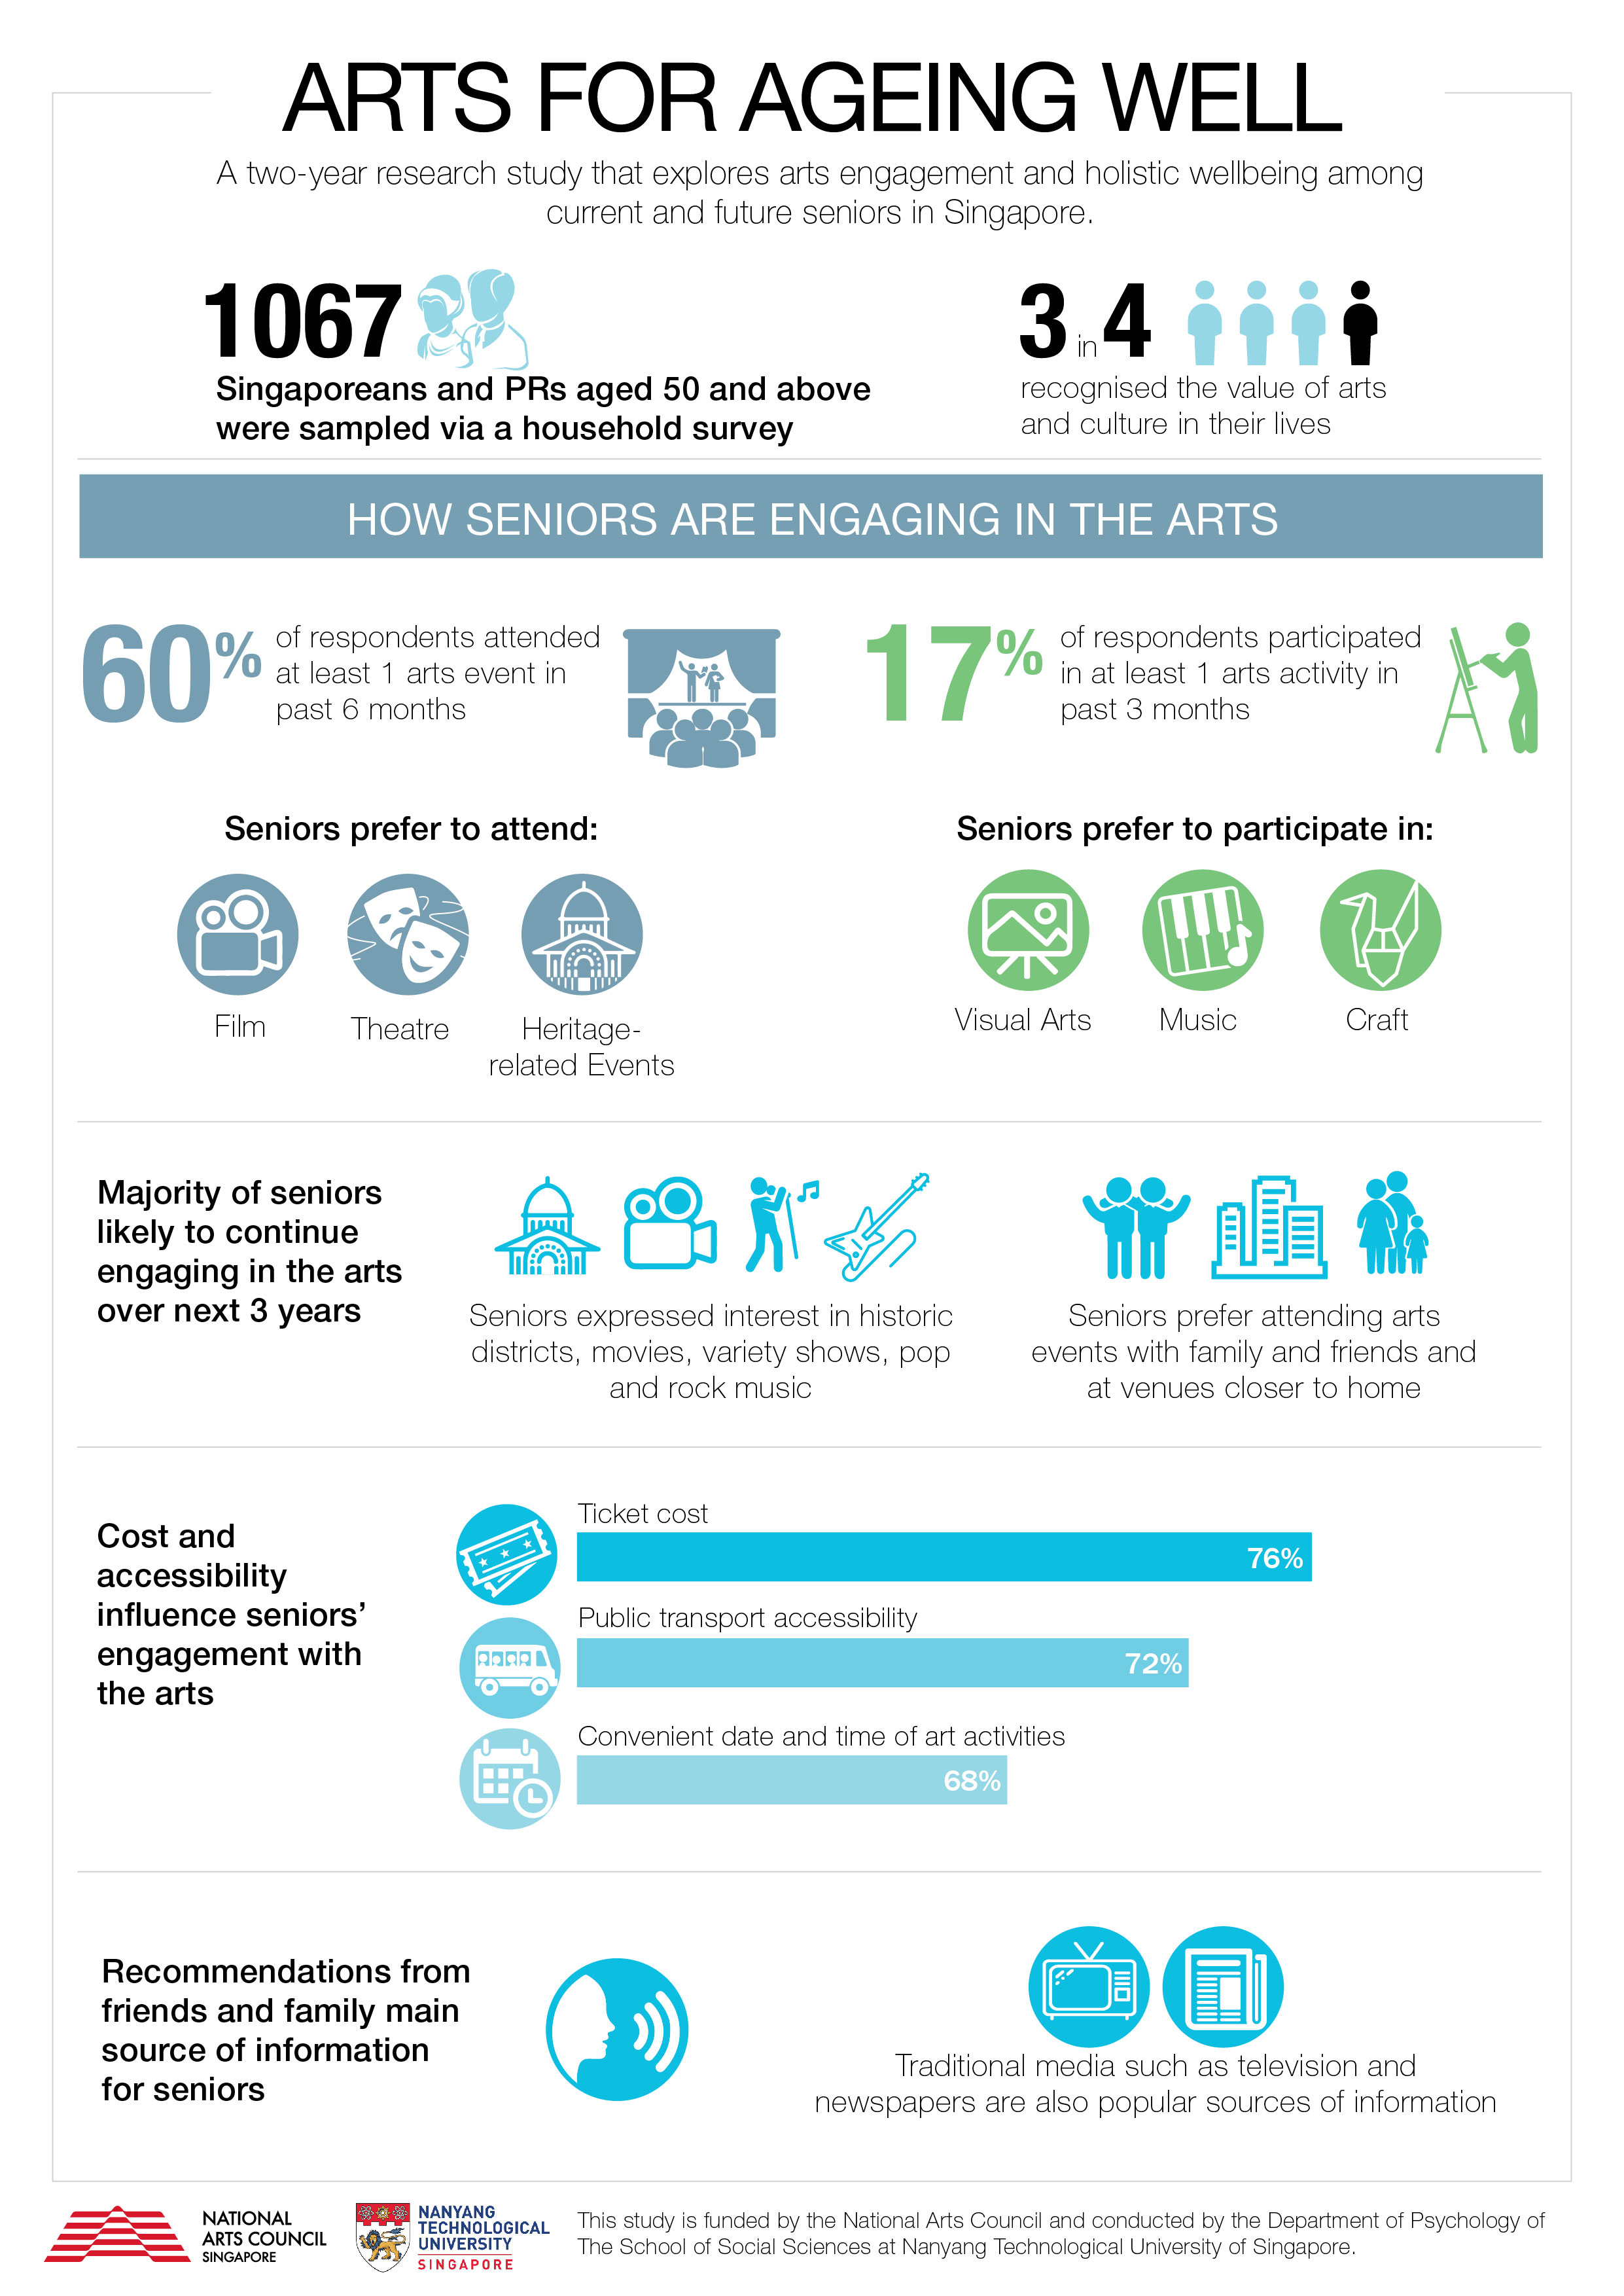 Arts-for-Ageing-Well-Study-infographic_Engagement_Part2